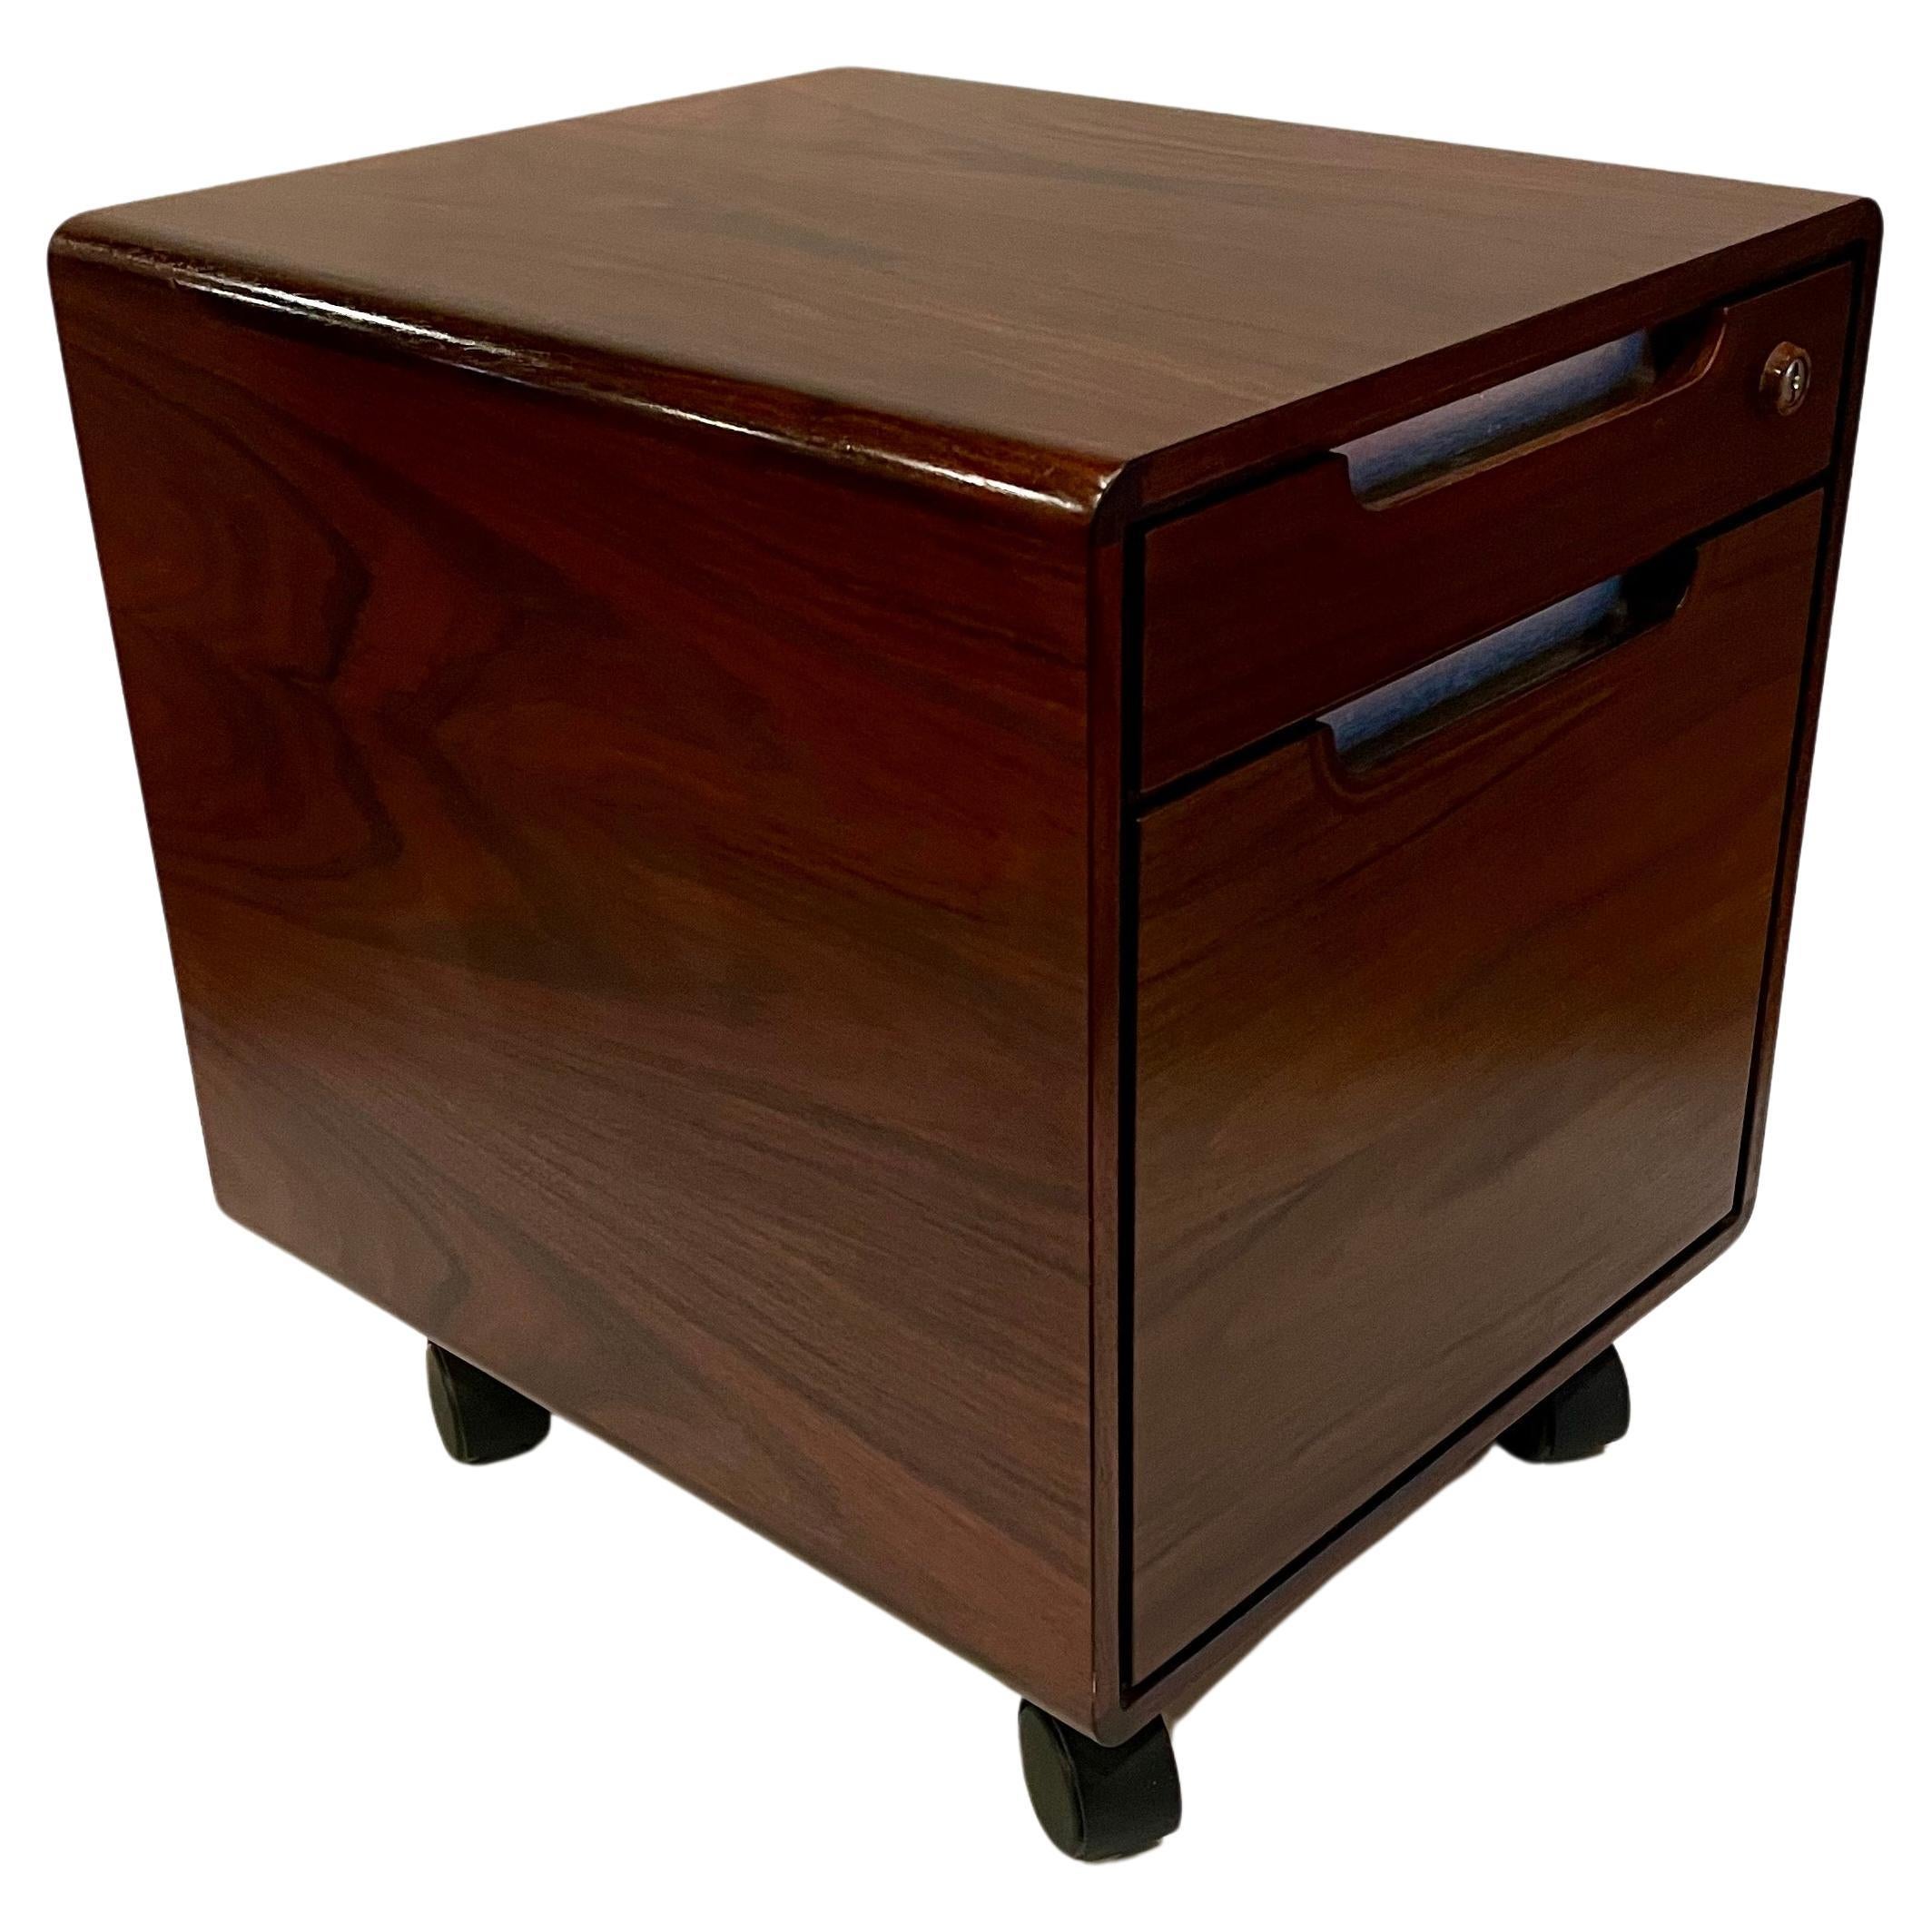 Post Modern Rosewood File Cabinet by Sibast Mobler Design by Posborg & Meyhoff